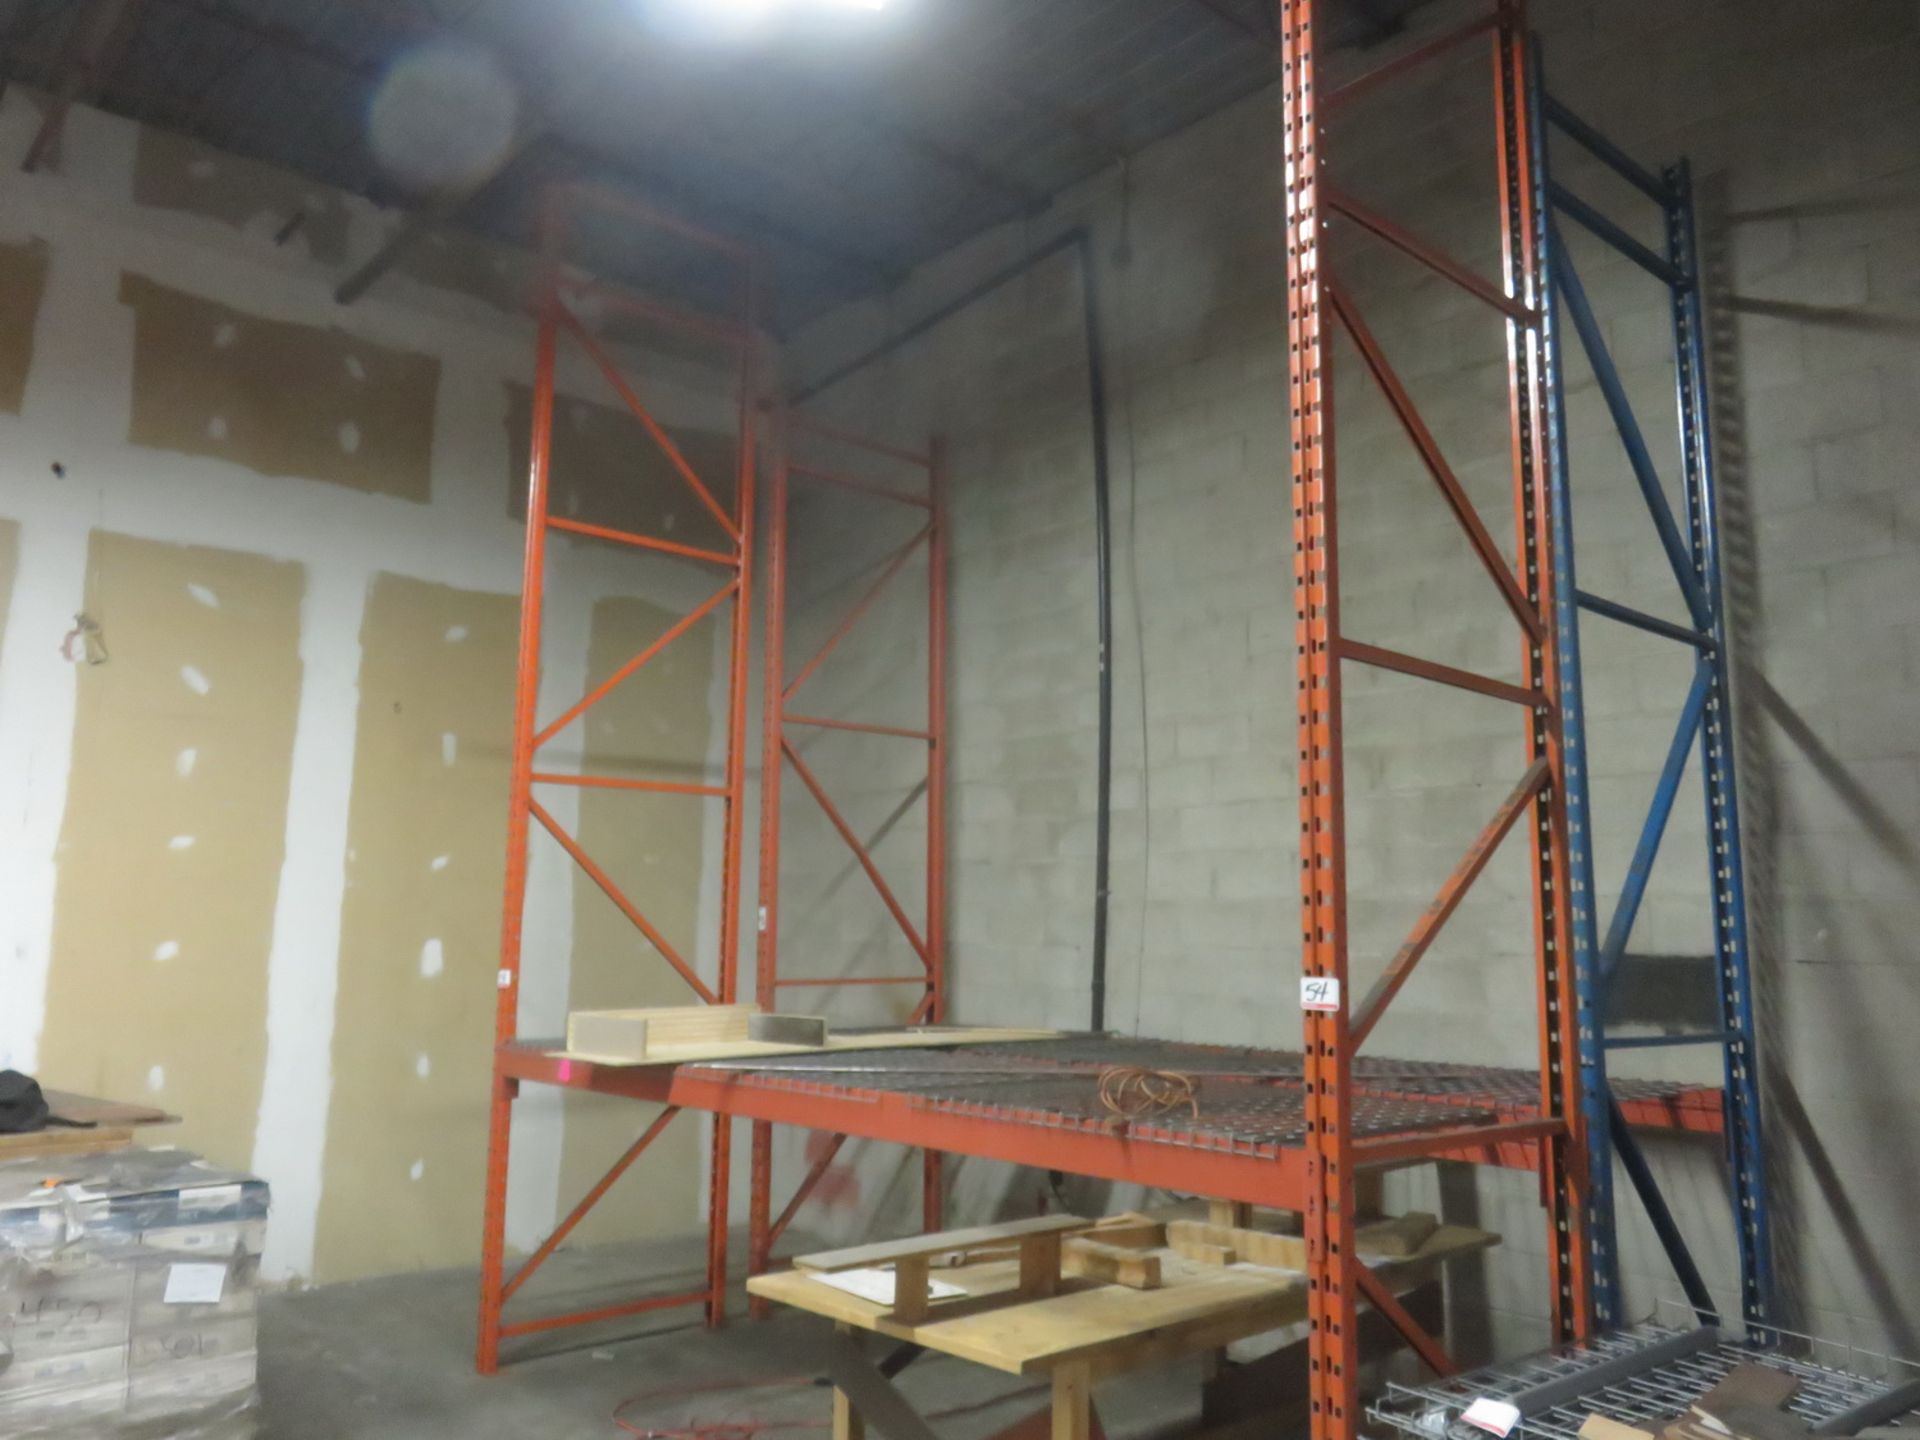 SECTIONS - ORANGE & BLUE 42" X 12' X 14' & 16'H RACKING (4 CROSS BEAMS TOTALS) (NO WIRE DECKING)